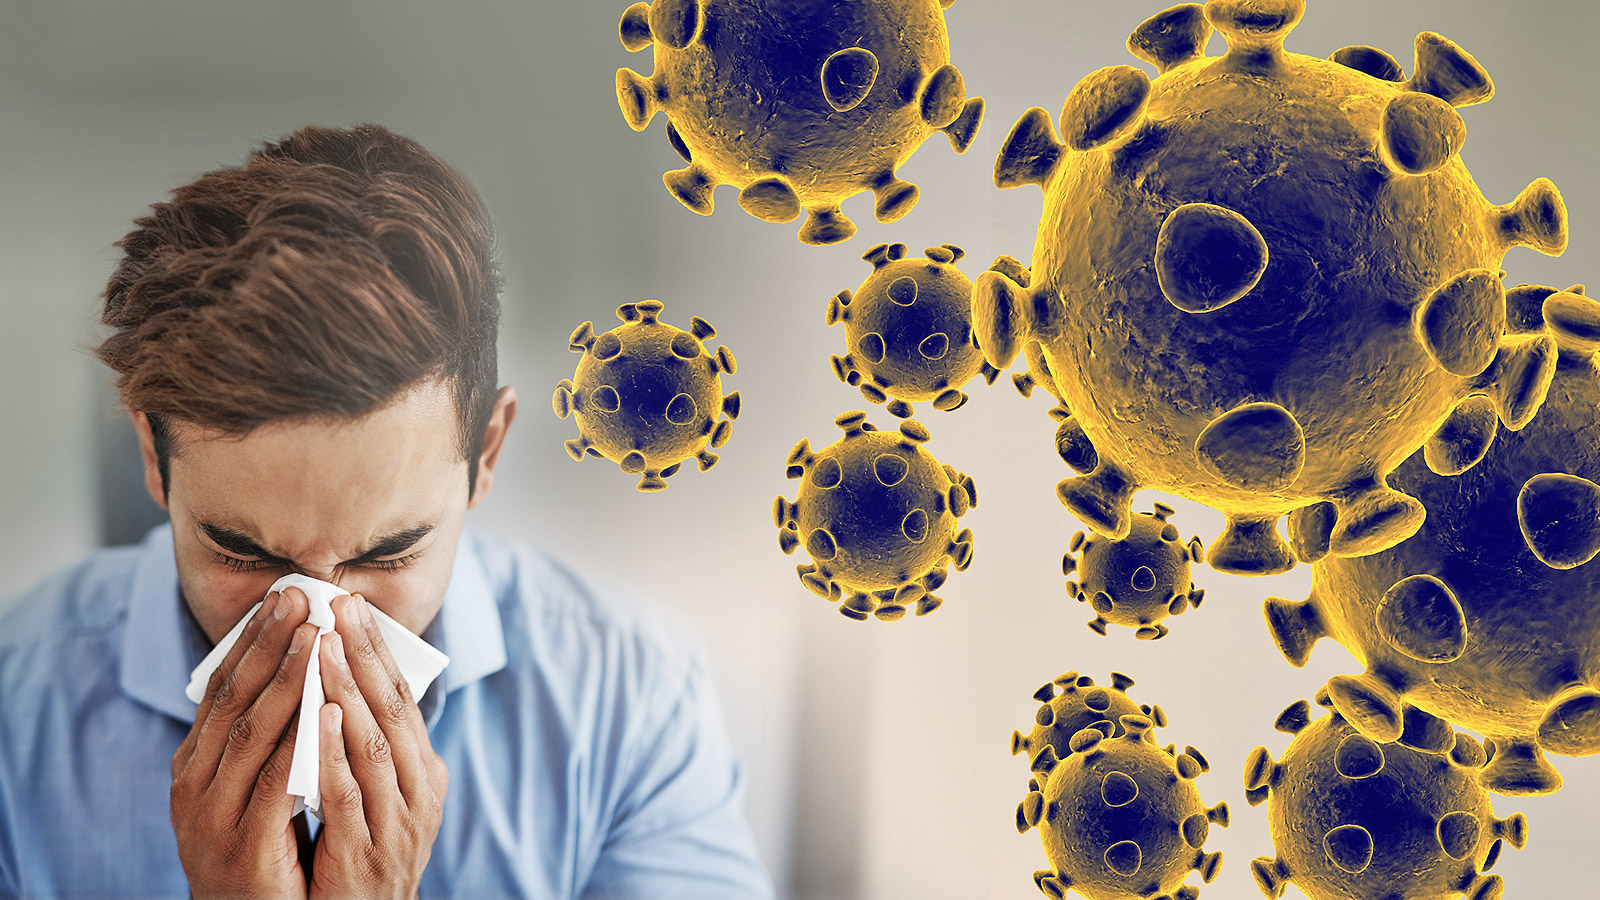 THE CORONAVIRUS IN THE WORKPLACE-HERE’S WHAT YOU SHOULD KNOW